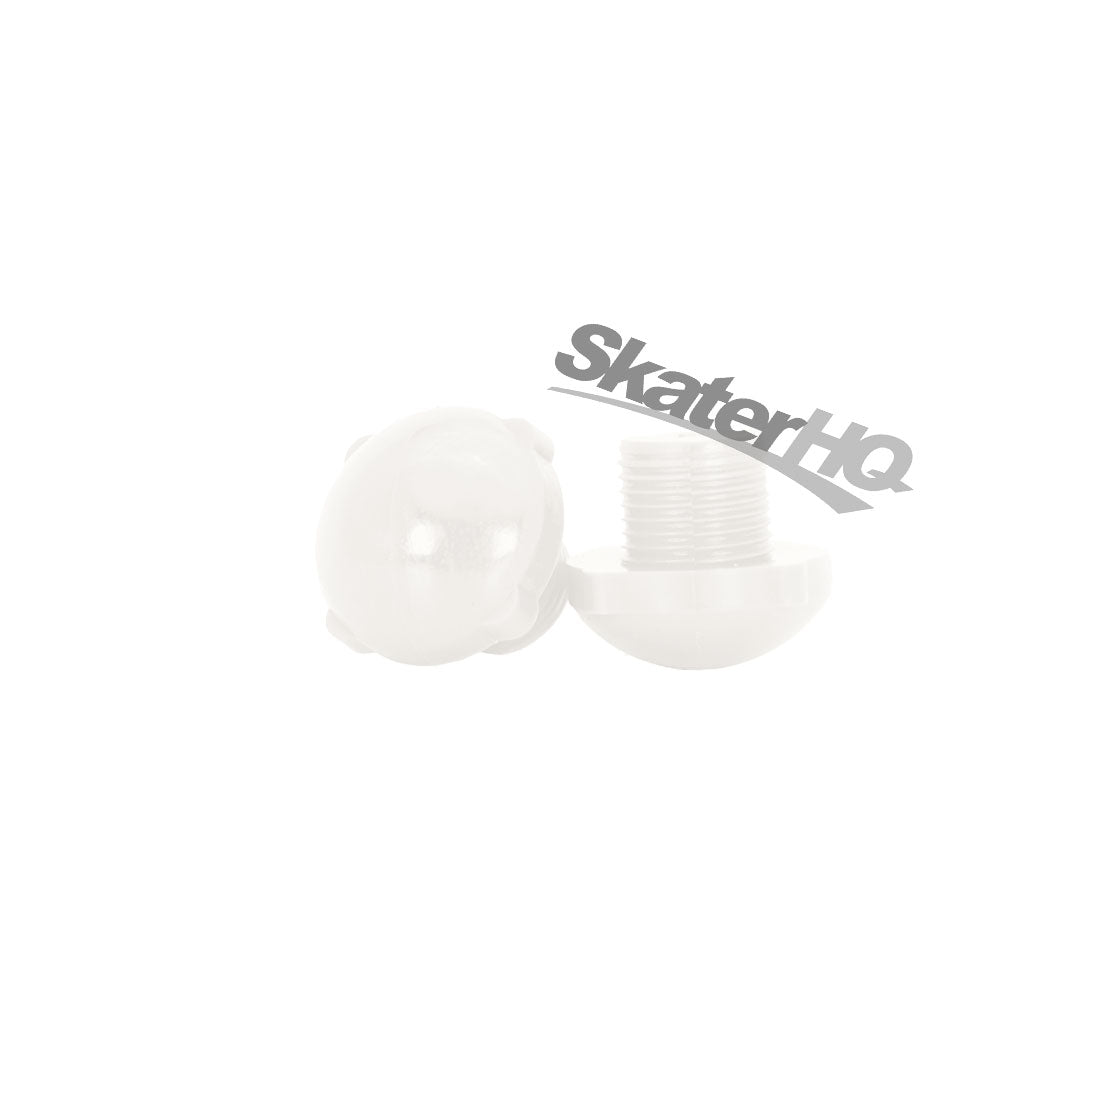 Sure-Grip Fomac Dance Plug 5/8 Pair - White Roller Skate Hardware and Parts